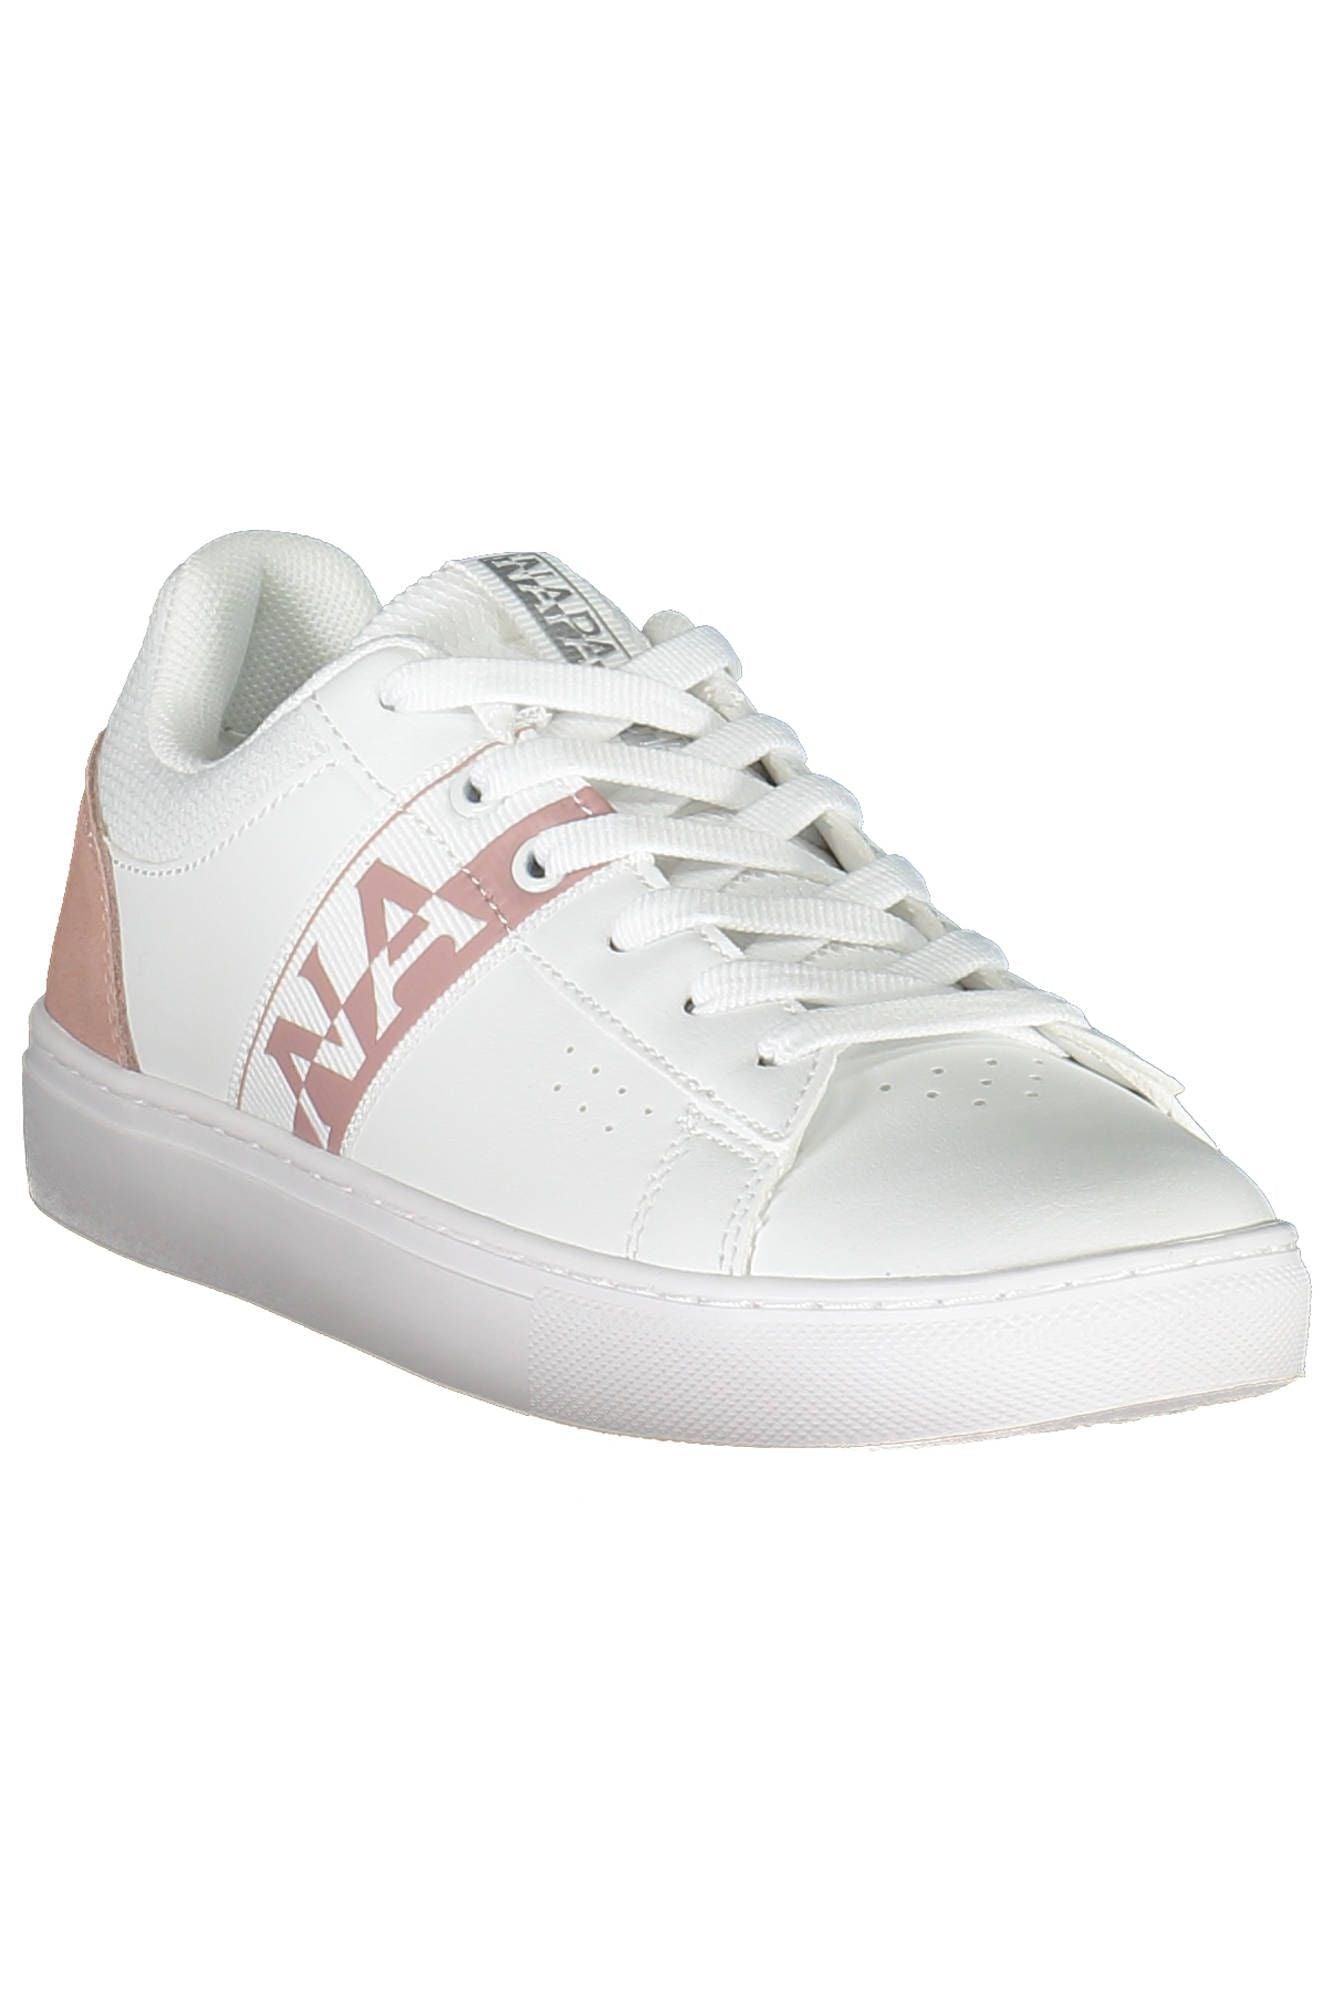 Napapijri Elevated White Sneakers with Contrasting Accents - PER.FASHION